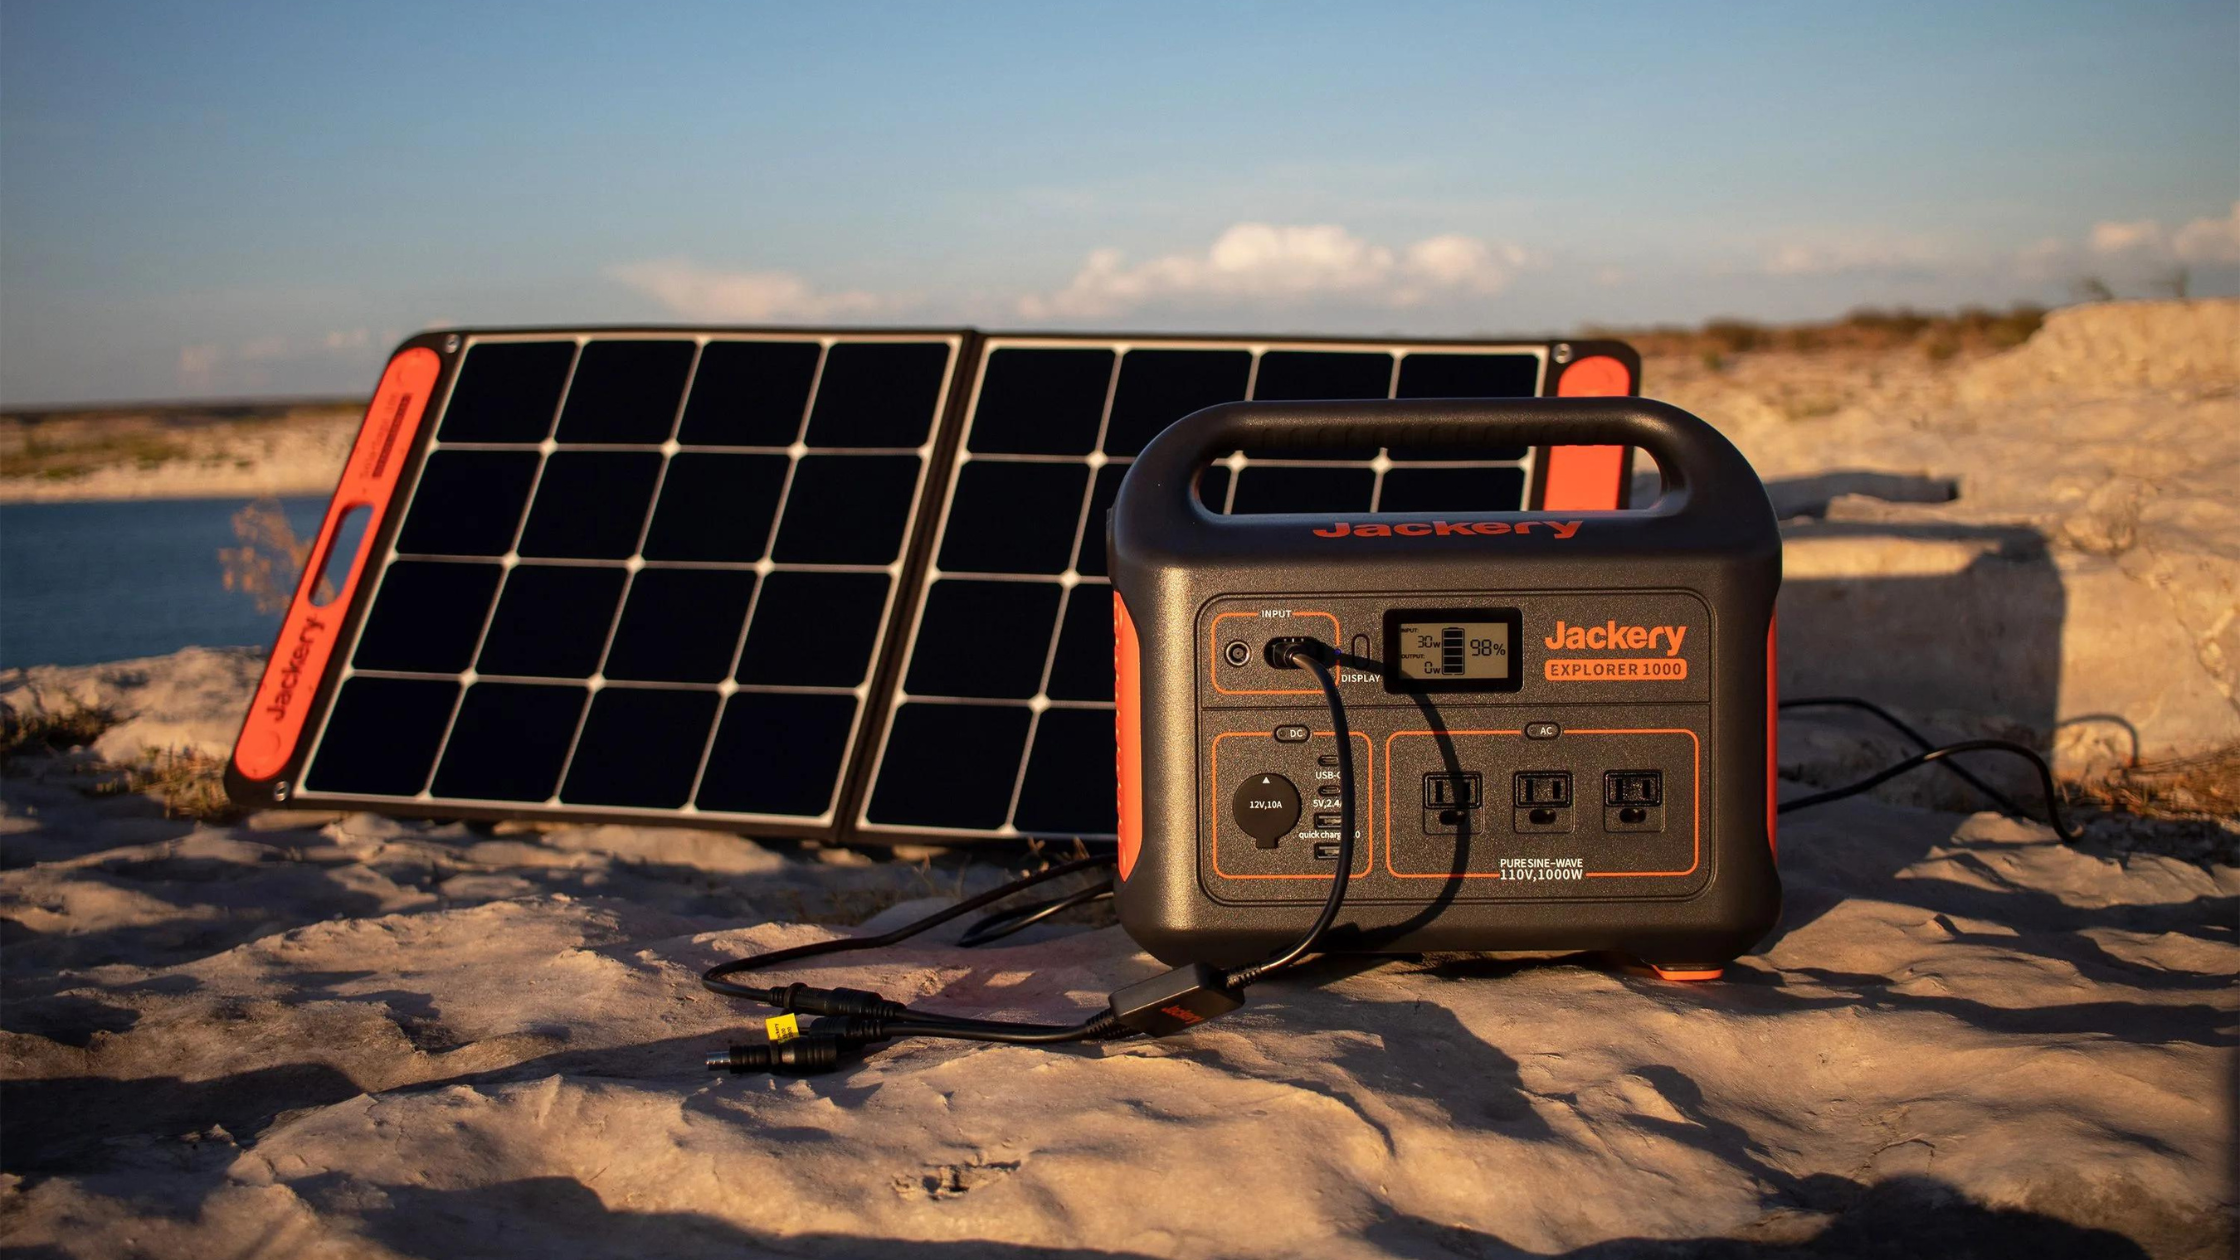 Sign-up to win a Jackery Explorer Portable Generator with Solar Charger.